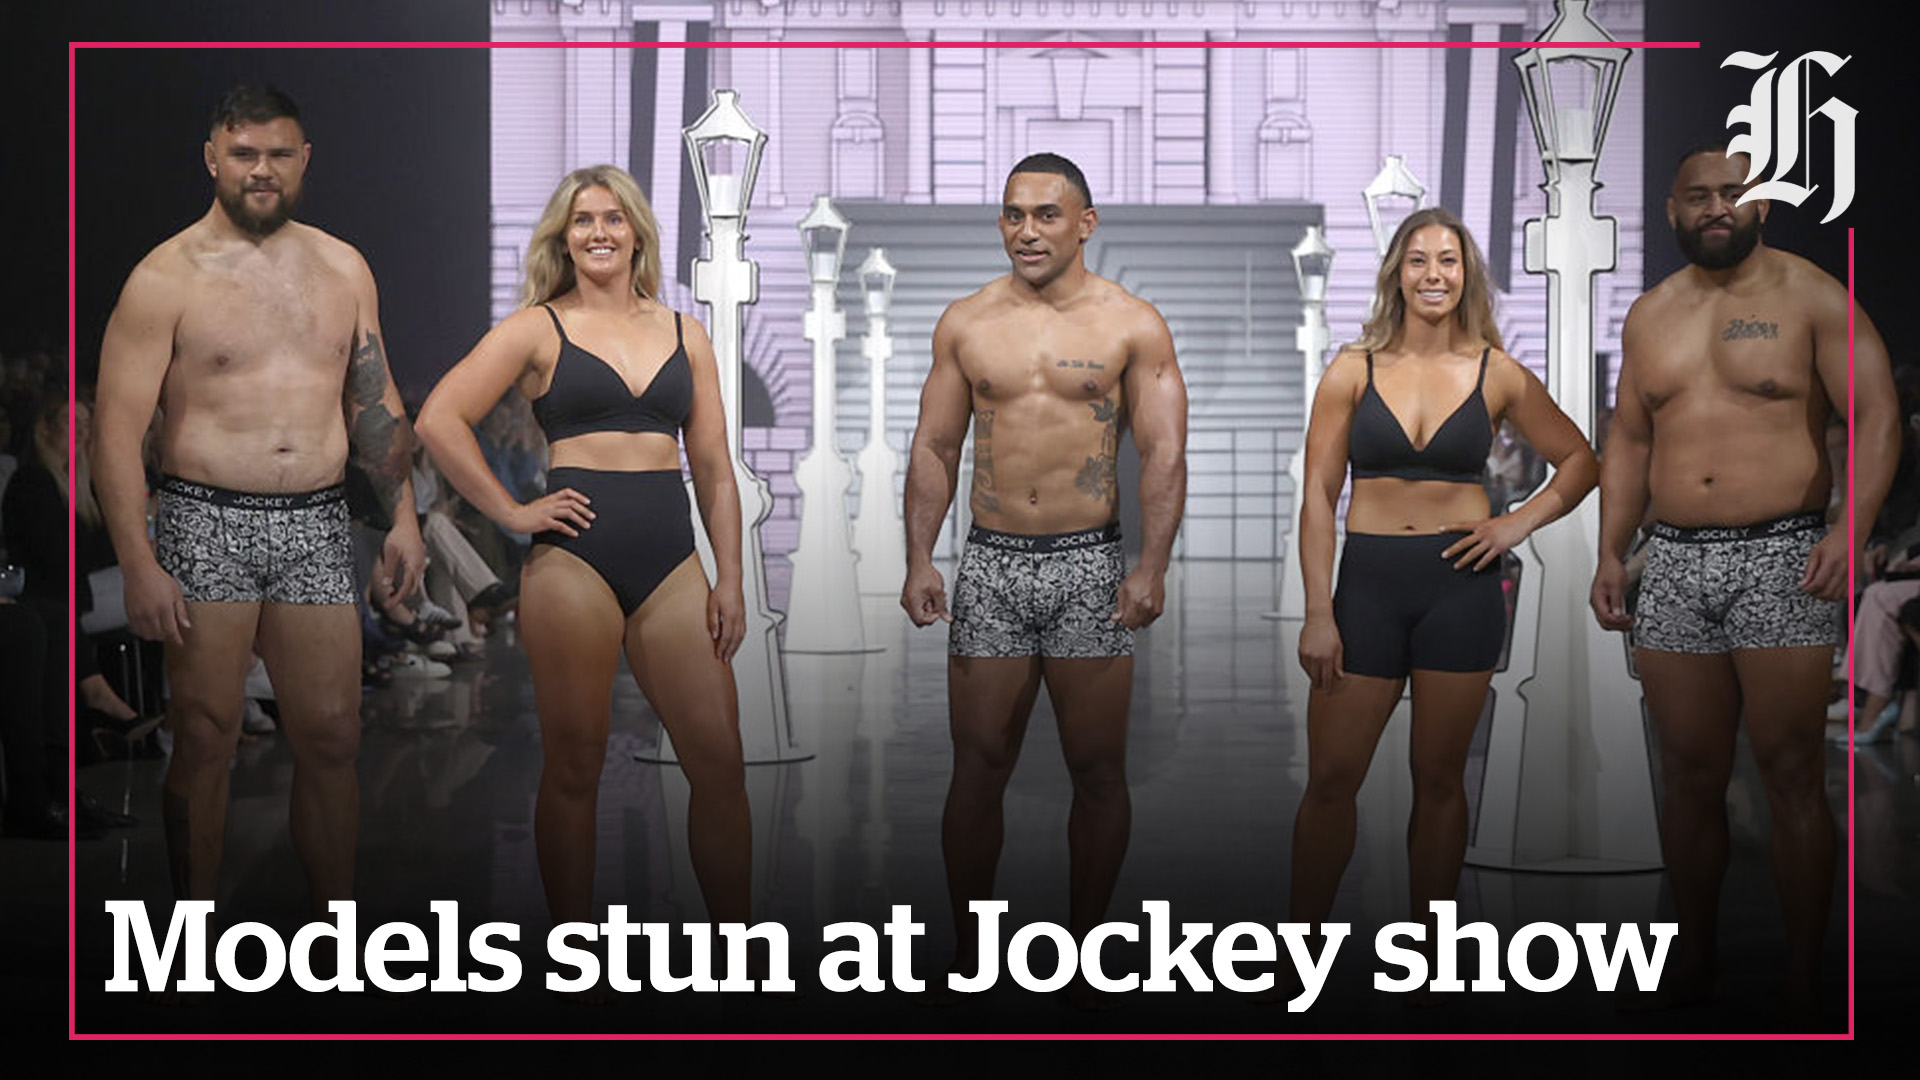 Jockey Shows All Blacks Ready for Anything in a Campaign with Emotive